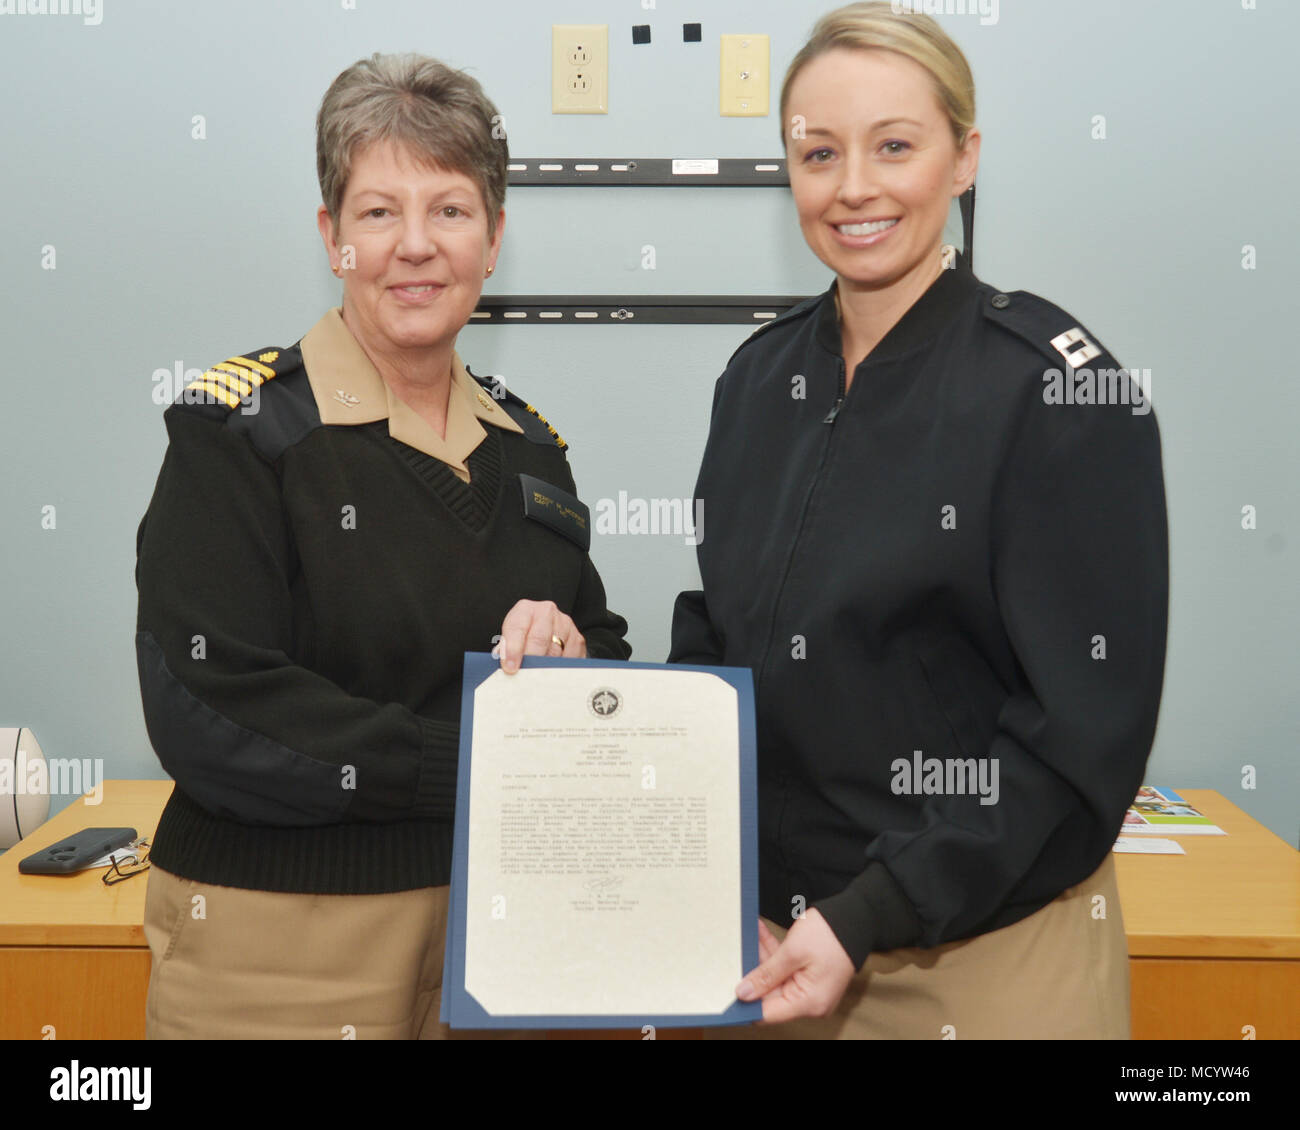 180307-N-PN275-1002 SAN DIEGO (March 02, 2018) Lt. Susan Murphy, right, assigned to Naval Medical Center San Diego(NMCSD), receives the Junior Officer of the Quarter award from Capt. Wendy McCraw. Lt. Murphy received the award for her leadership and work ethic while managing the NMCSD Intensive Care Unit, (U.S. Navy Photo by Mass Communication Specialist 2nd Class Zach Kreitzer/Released) Stock Photo